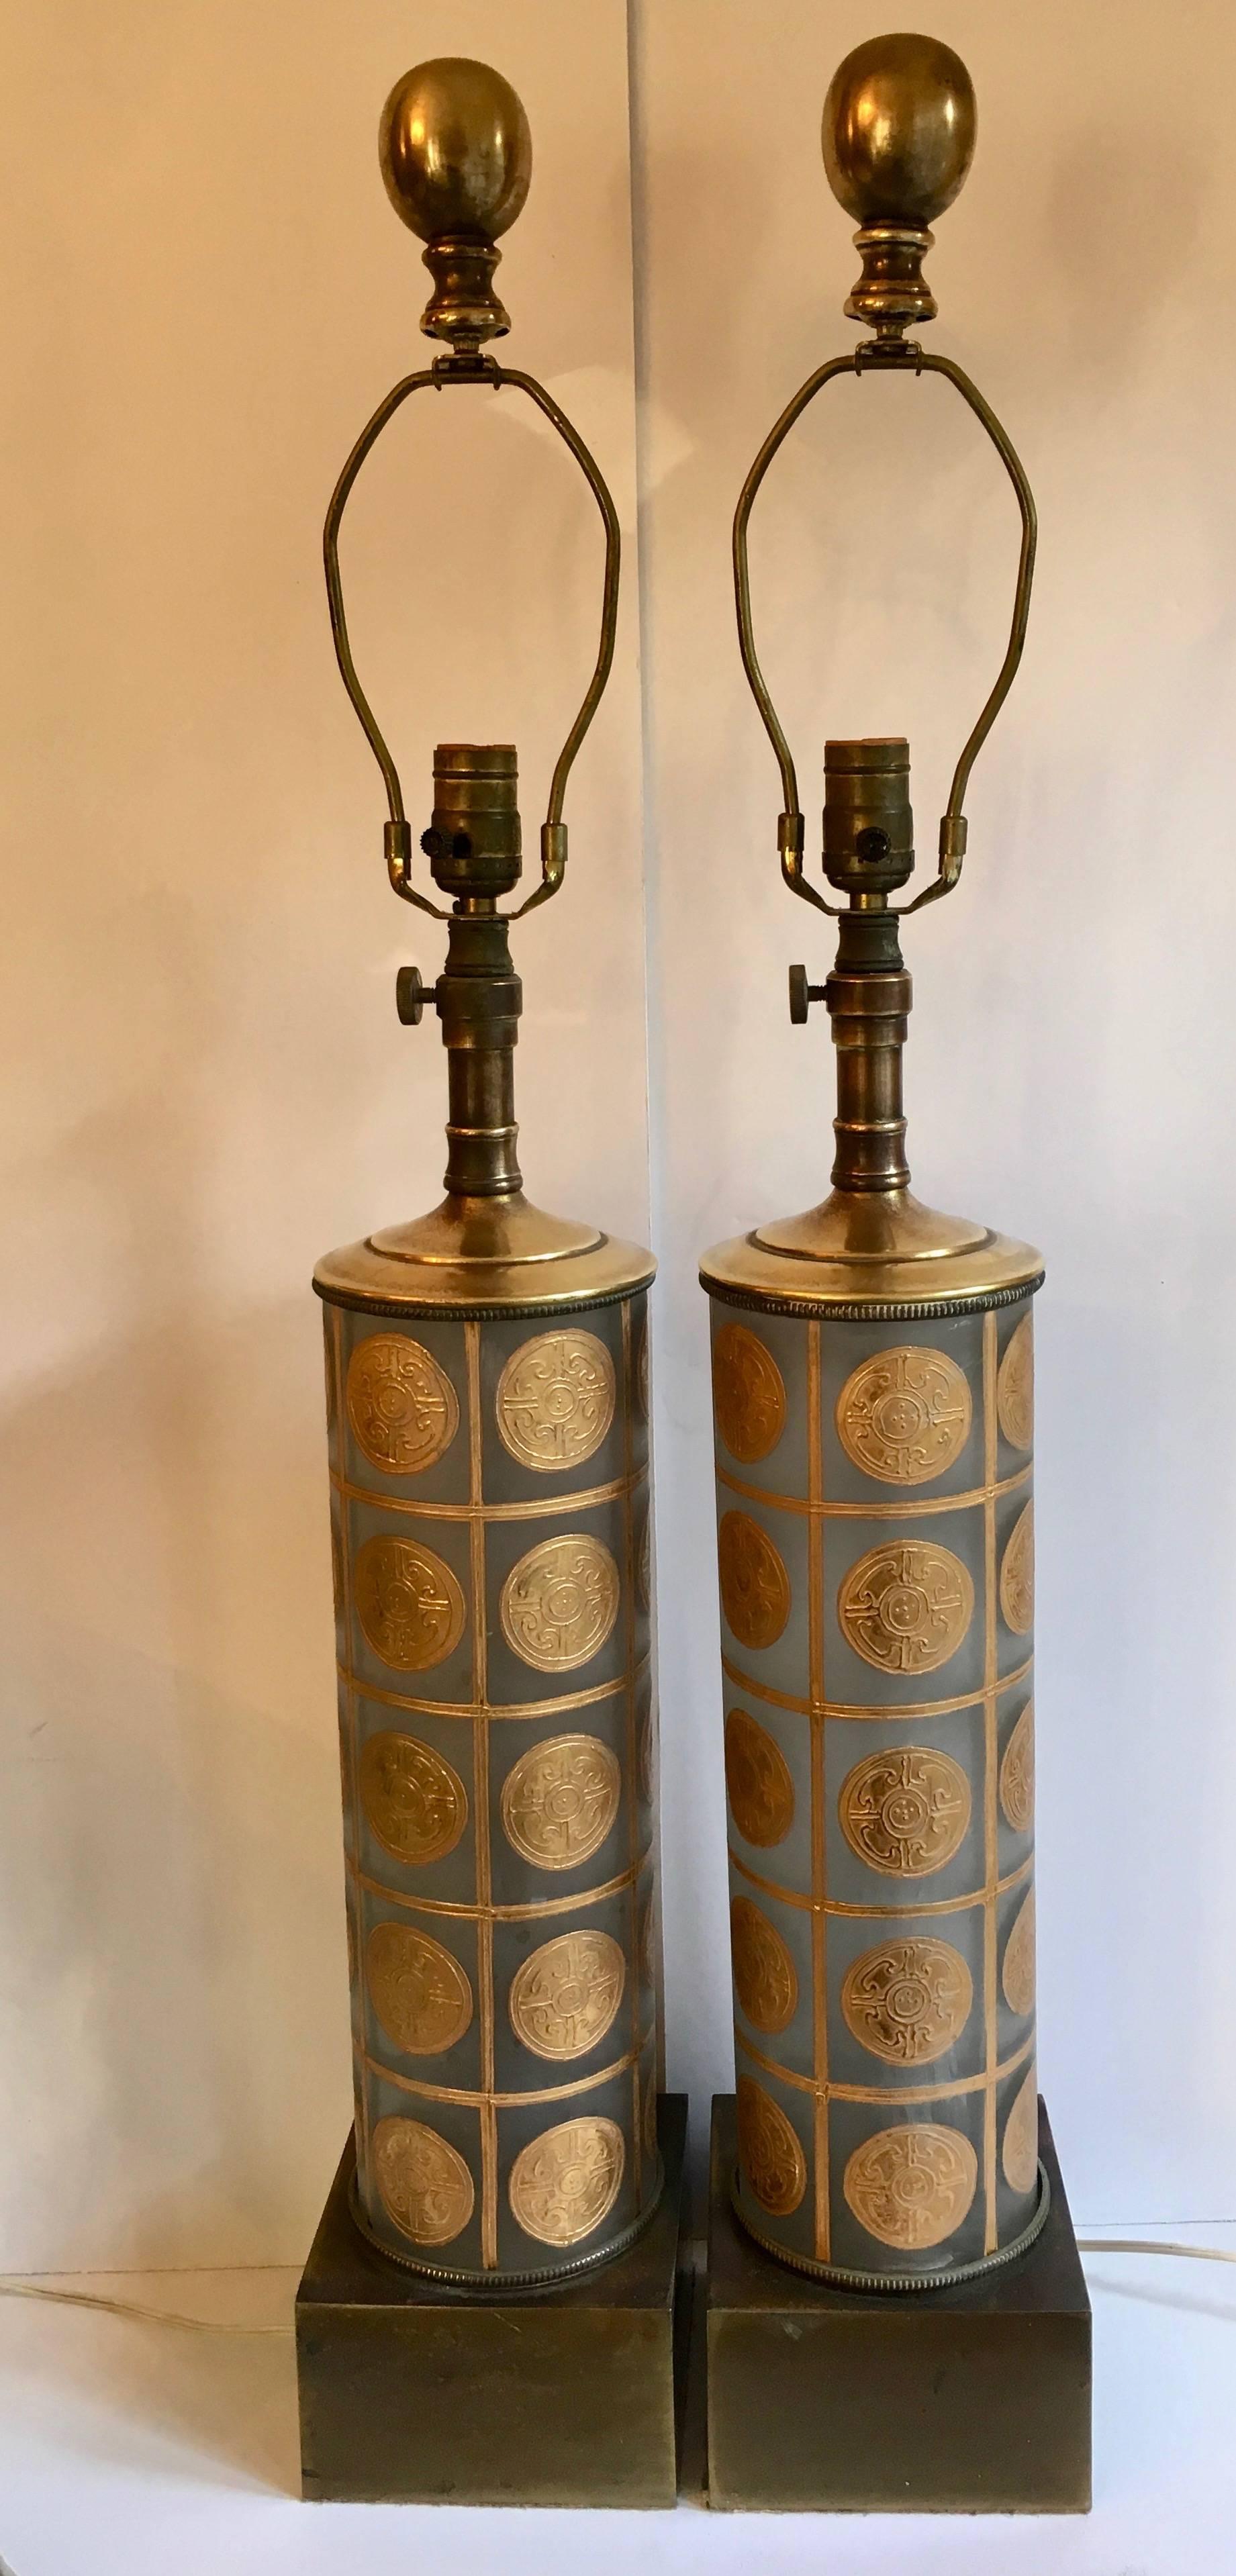 A spectacular pair greatly echoing the design of Versace. Shhh I won't tell if you don't.

Frosted glass with gilt medallions and beautifully Patinated base and stem. The stem is adjustable to add 2